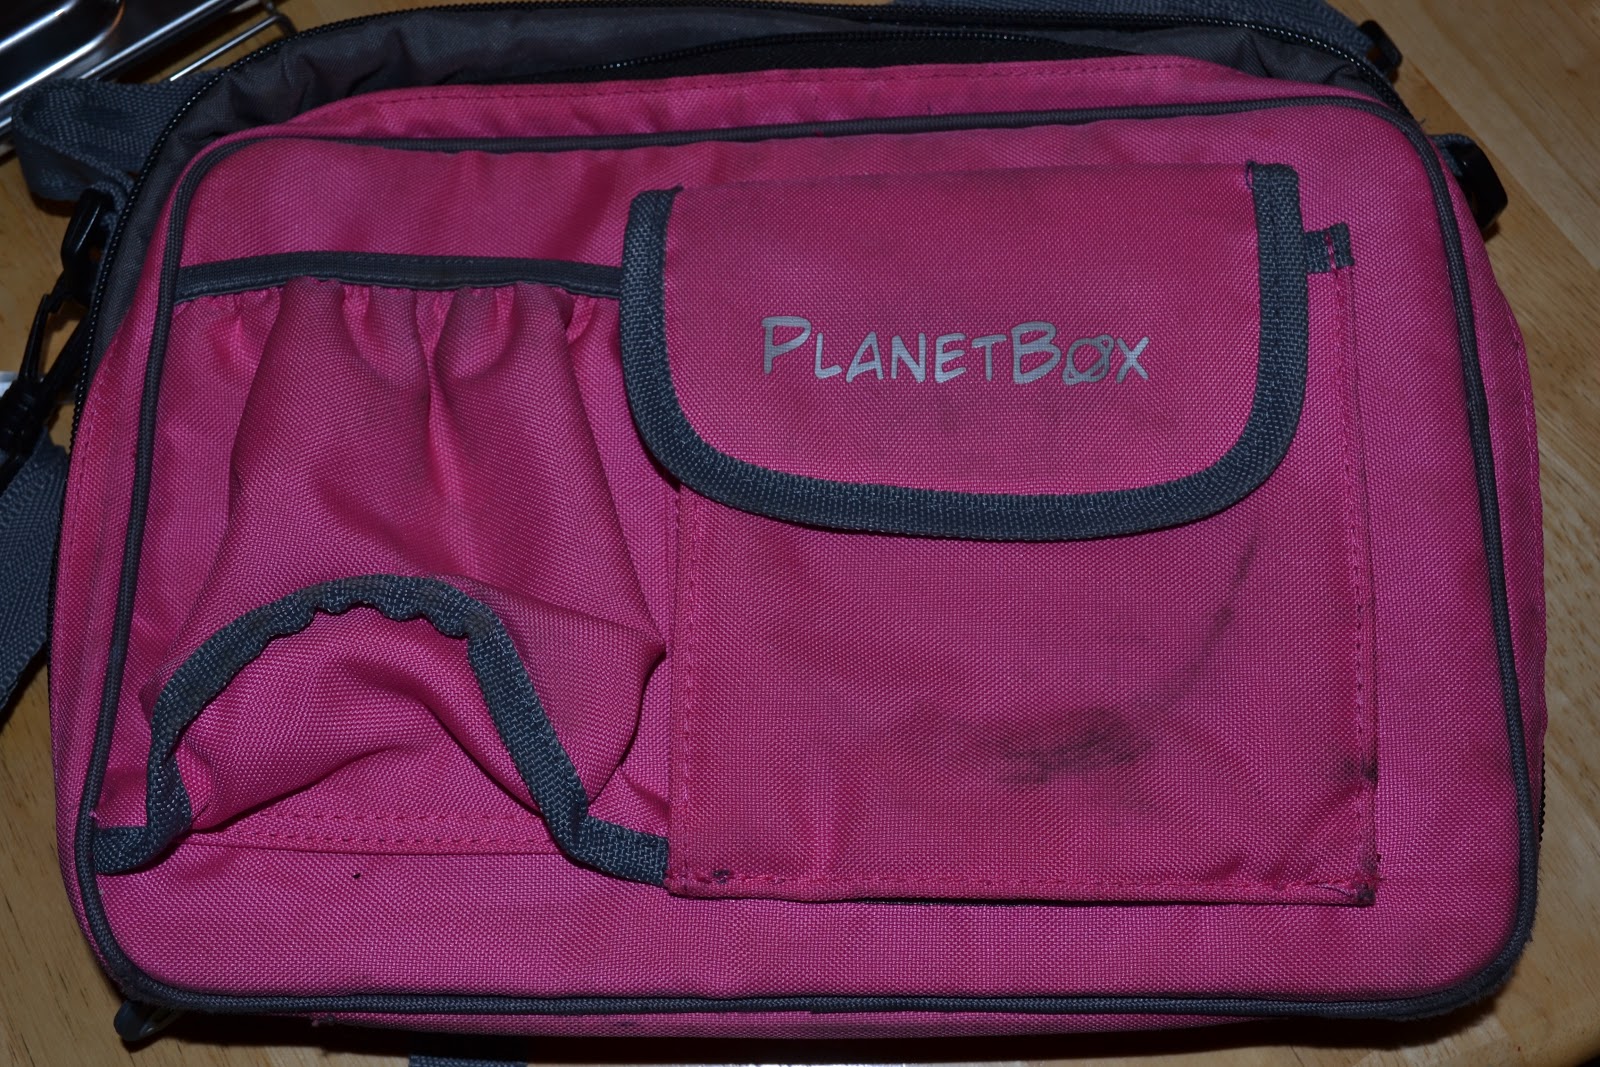 Lunch Time Is a Start: Review of the Planetbox Rover System Lunch Bags That Fit Planetbox Rover